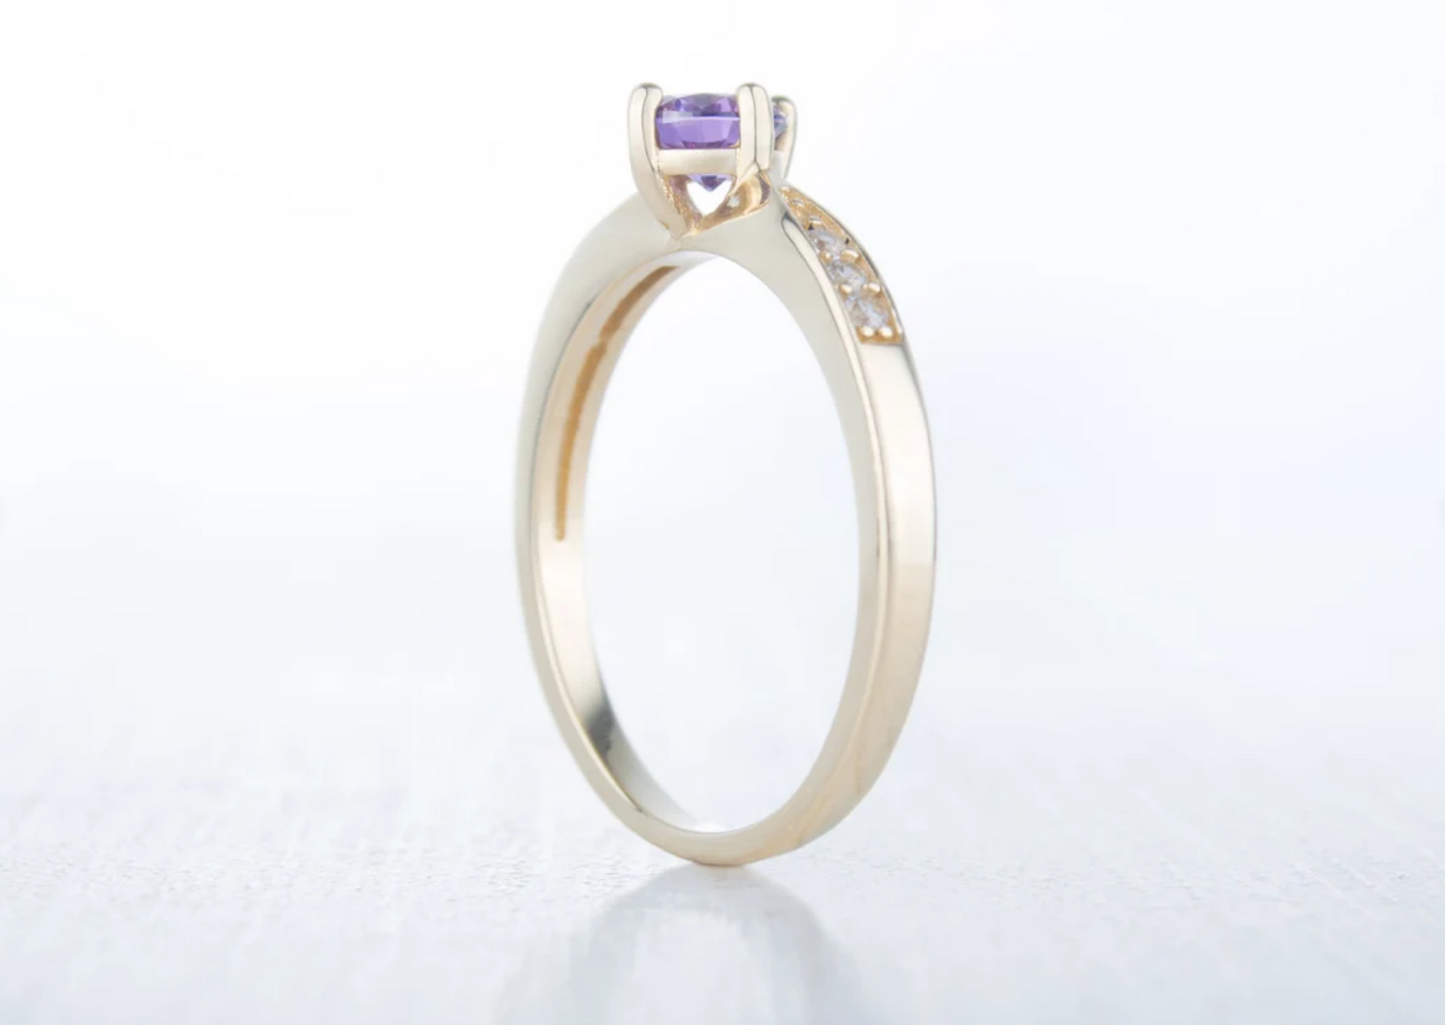 Size UK O / US 7 10K Solid Yellow Gold and Amethyst Engagement ring.